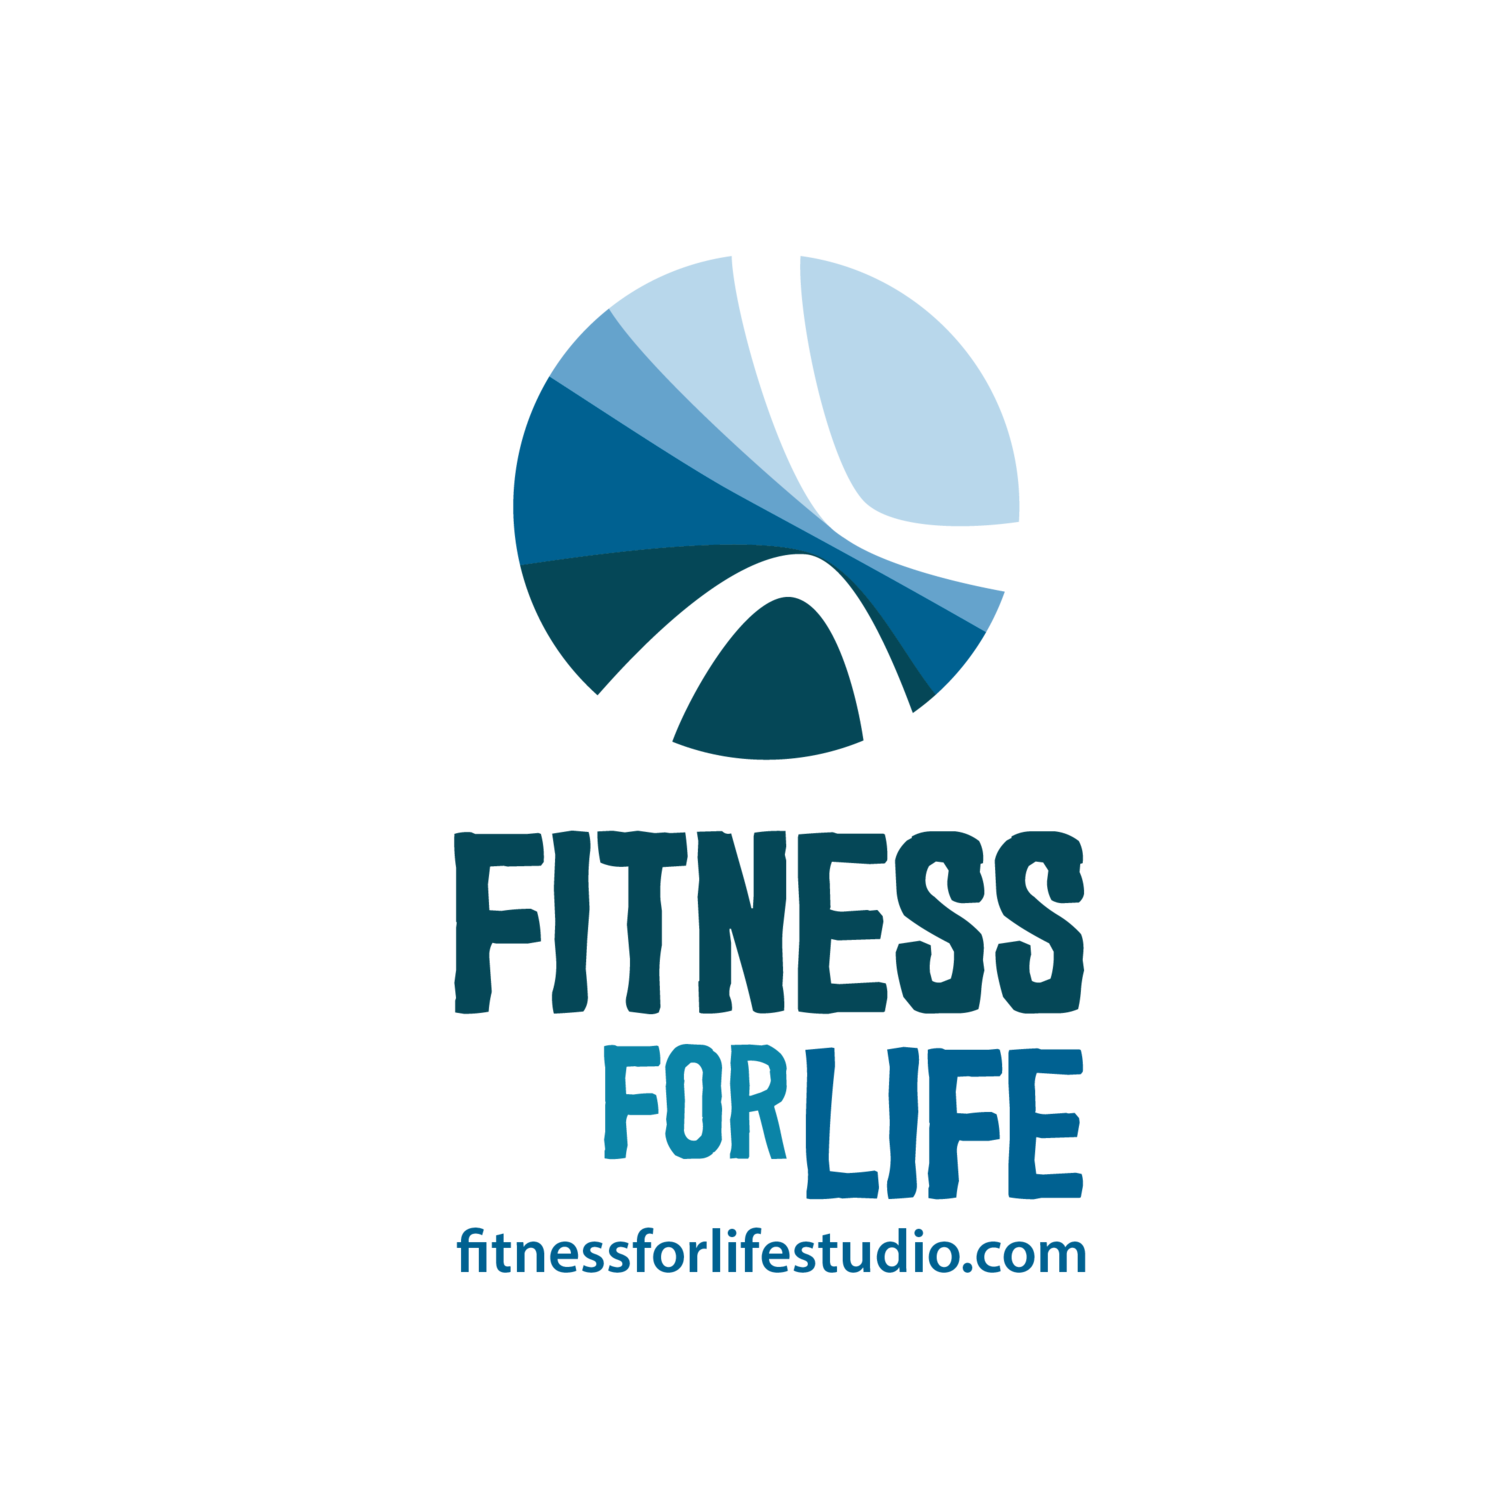 FITNESS FOR LIFE